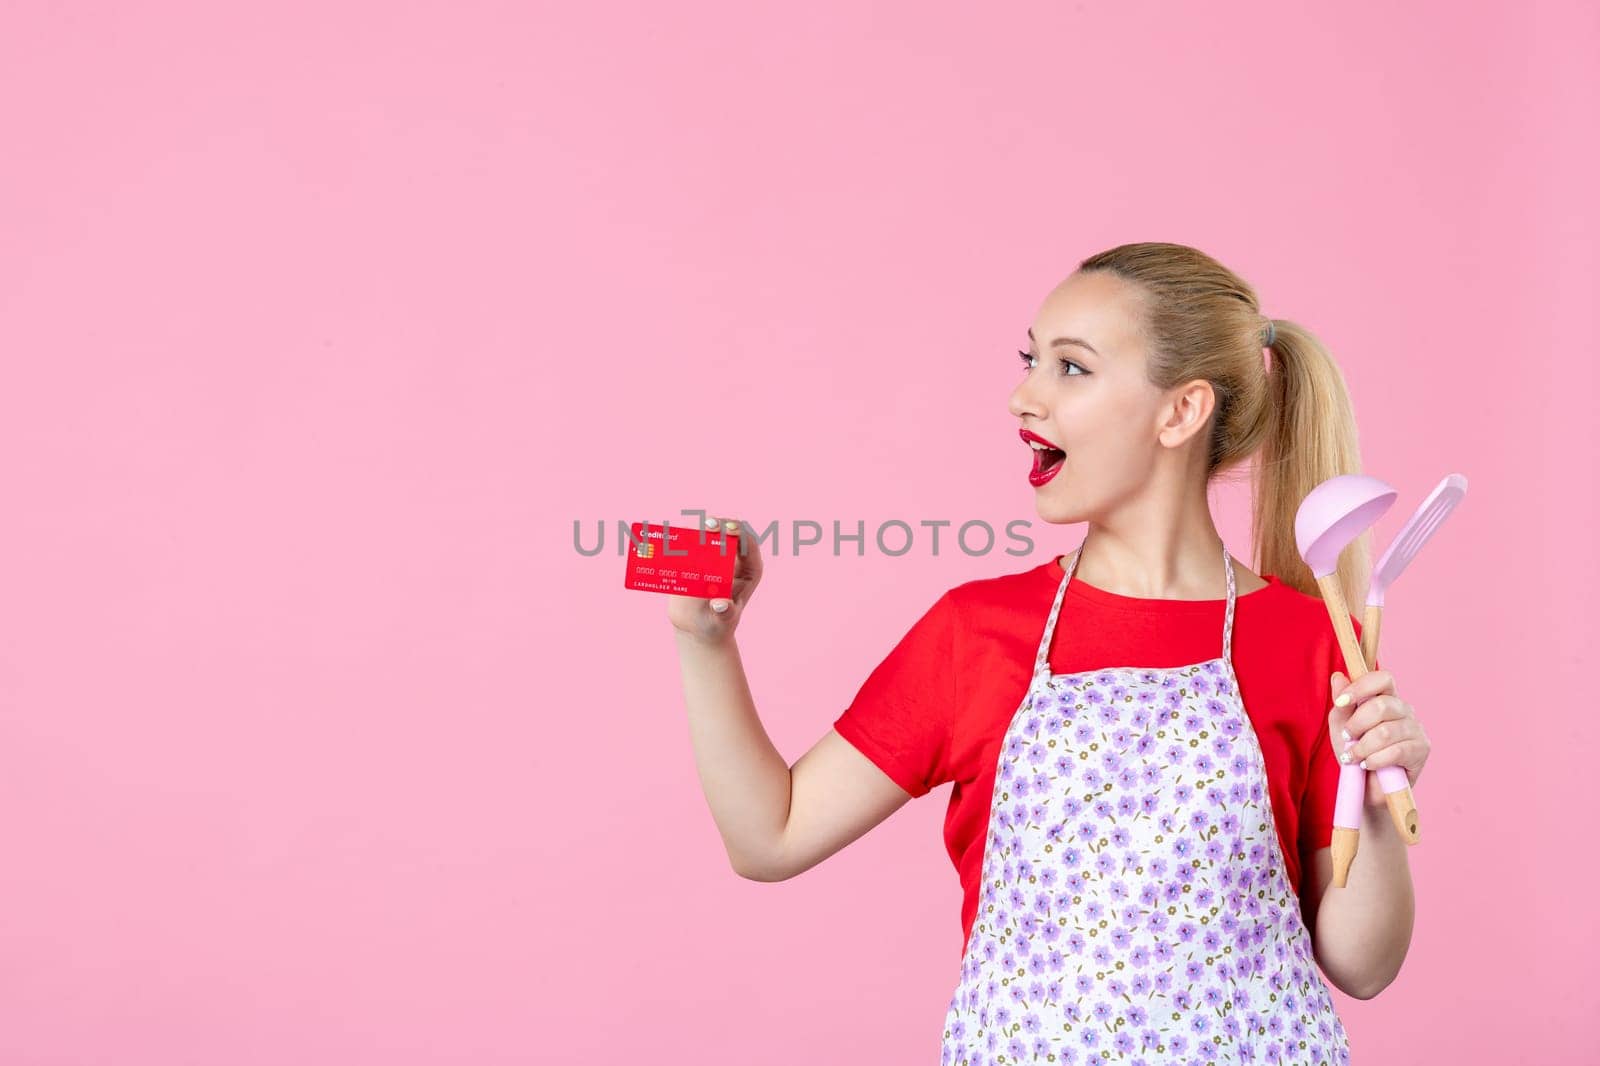 front view young housewife in cape holding spoons and bank card on pink background occupation duty worker cutlery horizontal wife profession uniform job